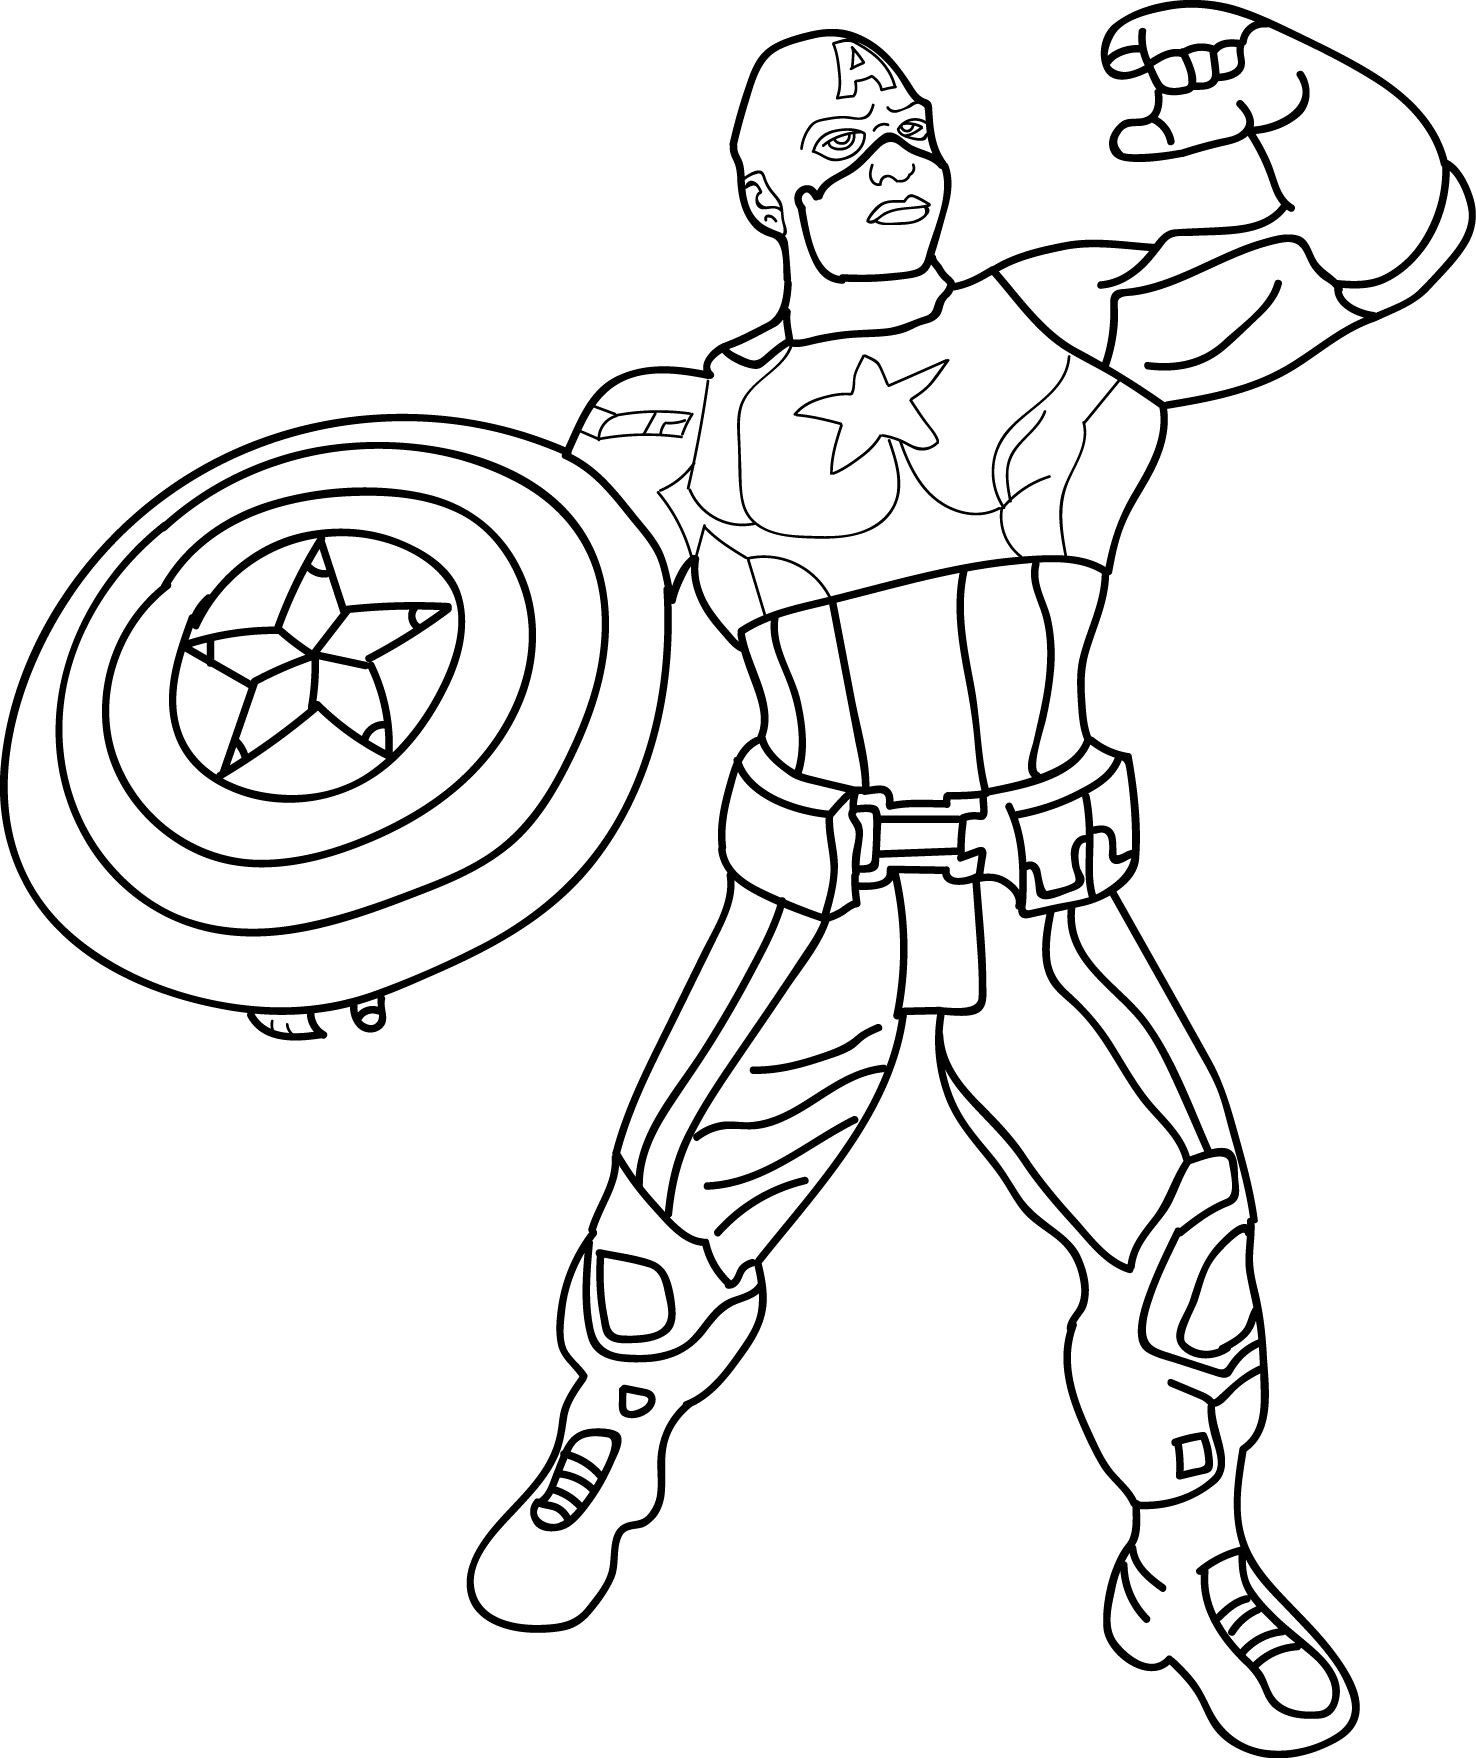 Captain America Coloring Pages Printable At Getcolorings | Free encequiconcerne Coloriages Captain America